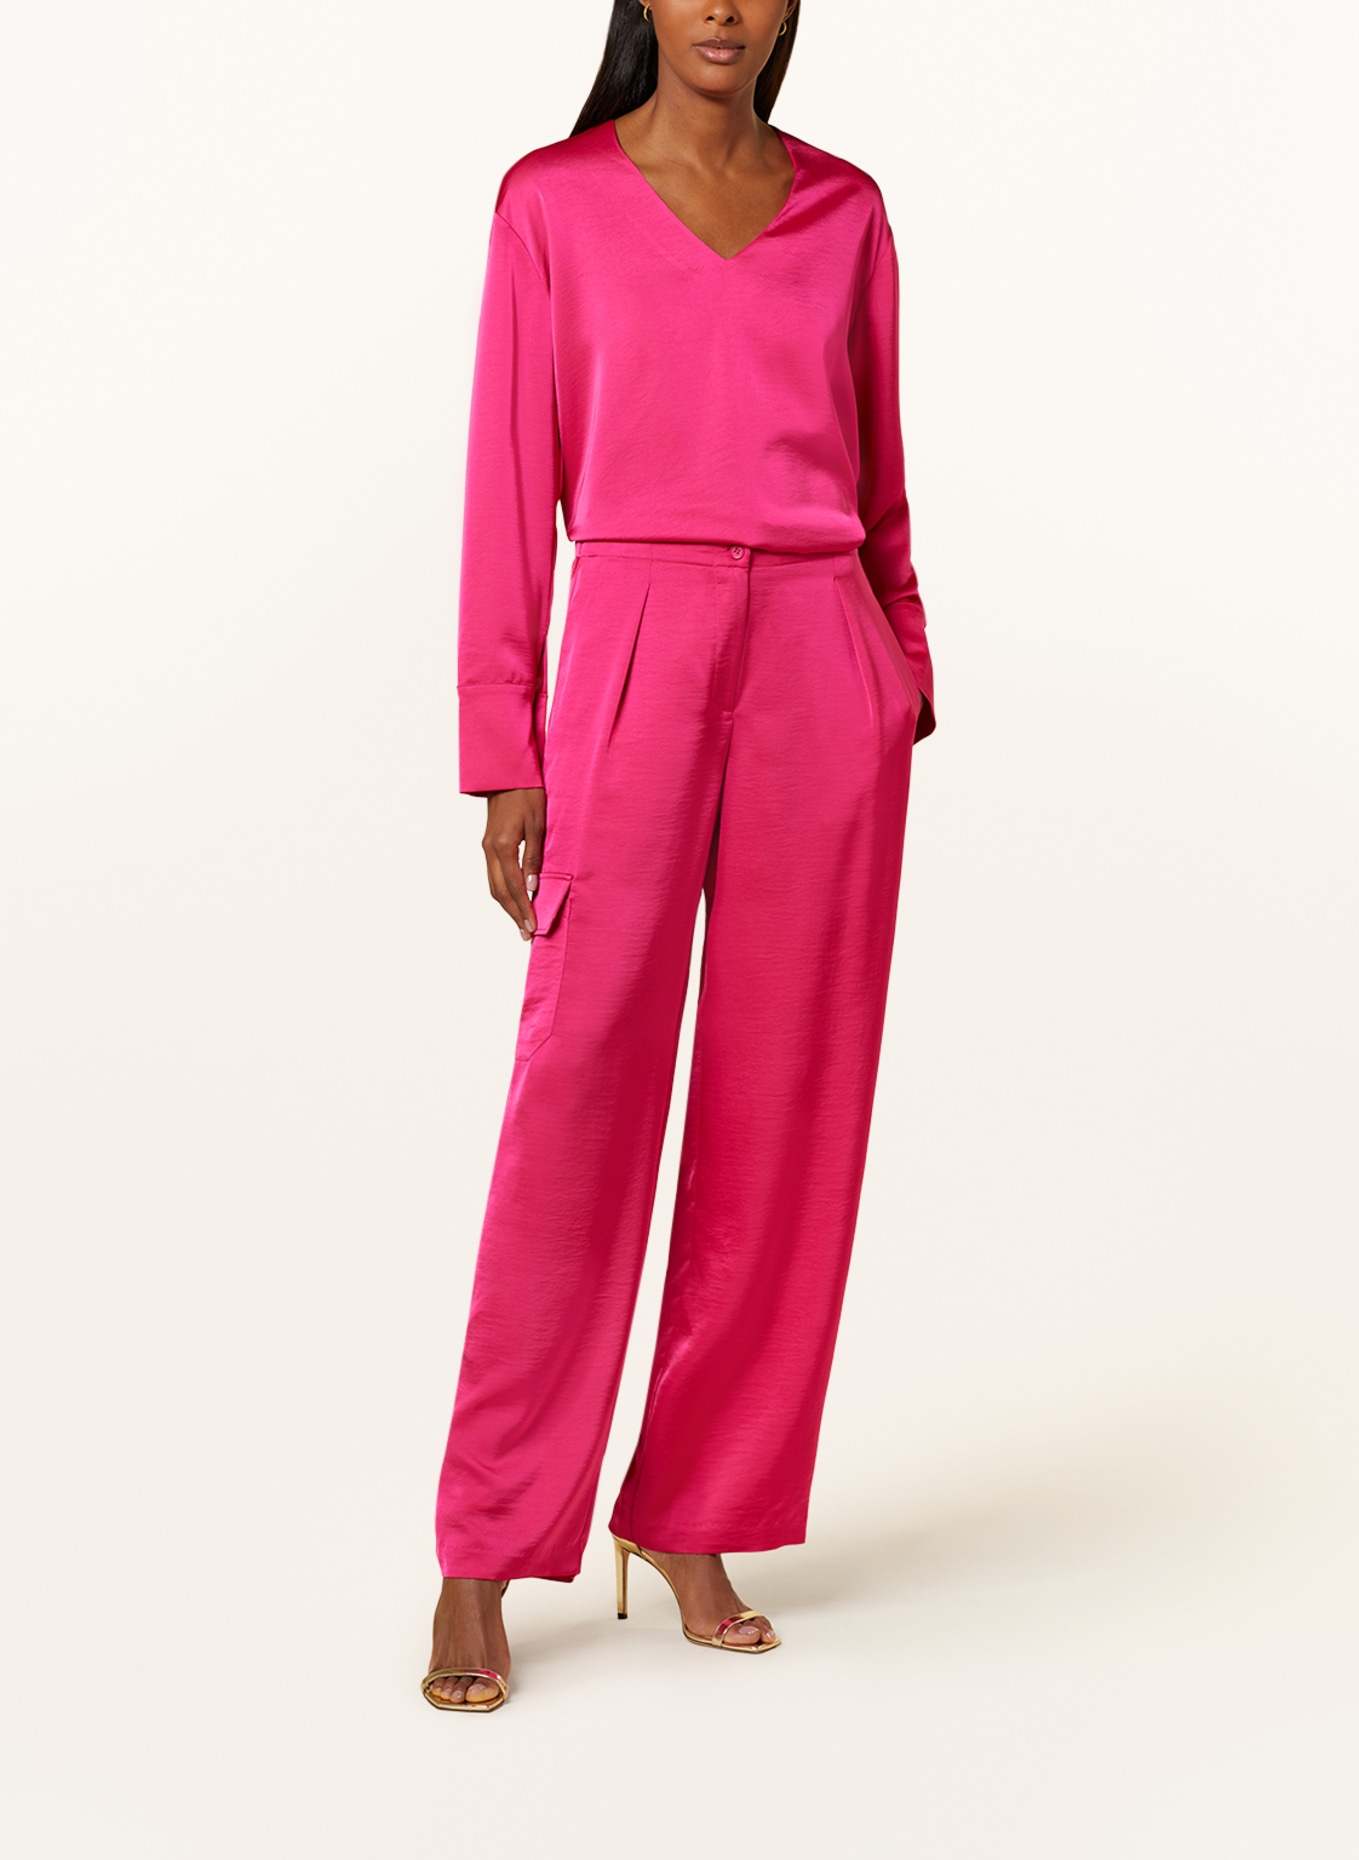 DANTE6 Shirt blouse BODIL made of satin, Color: PINK (Image 2)